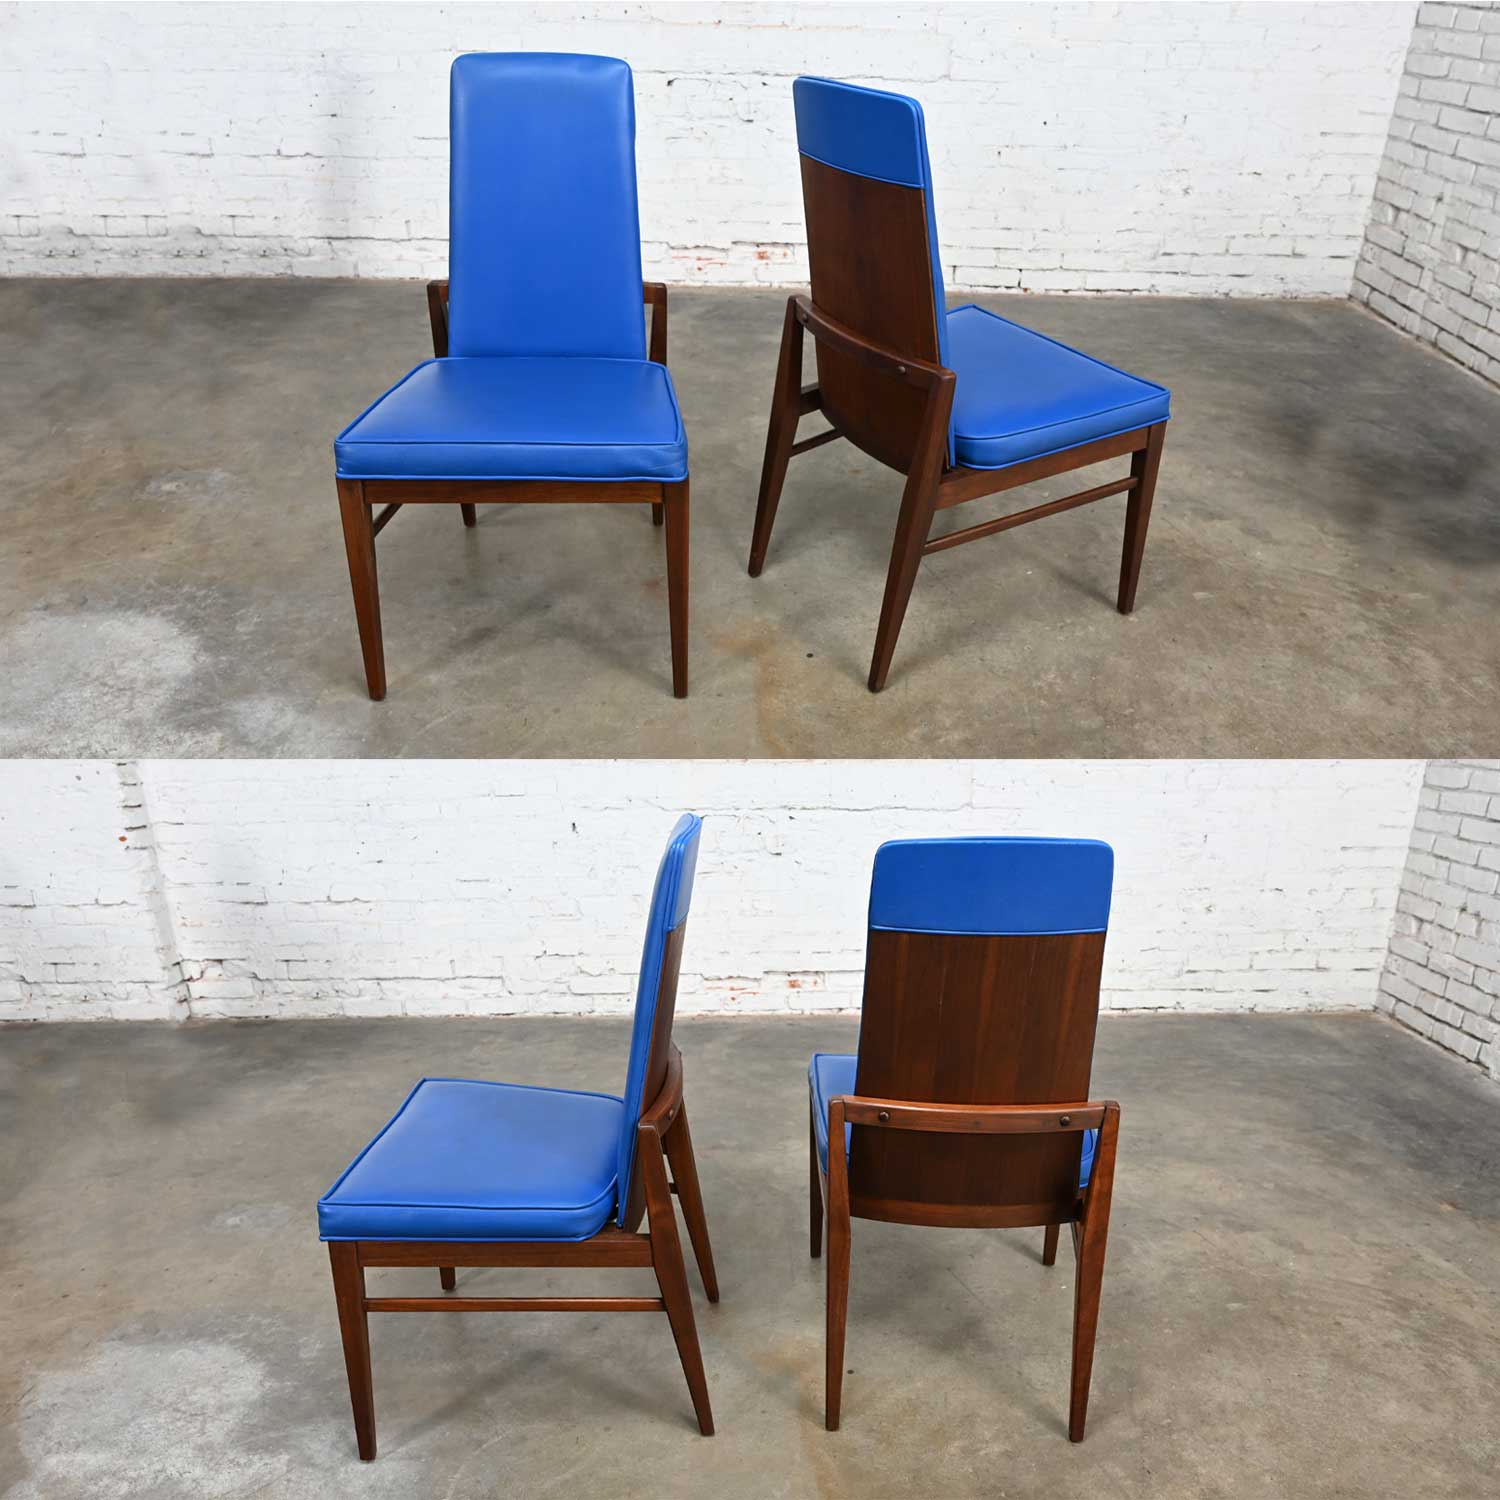 Vintage Mid Century Modern Foster McDavid Cobalt Blue Faux Leather Dining Chairs Set of 4